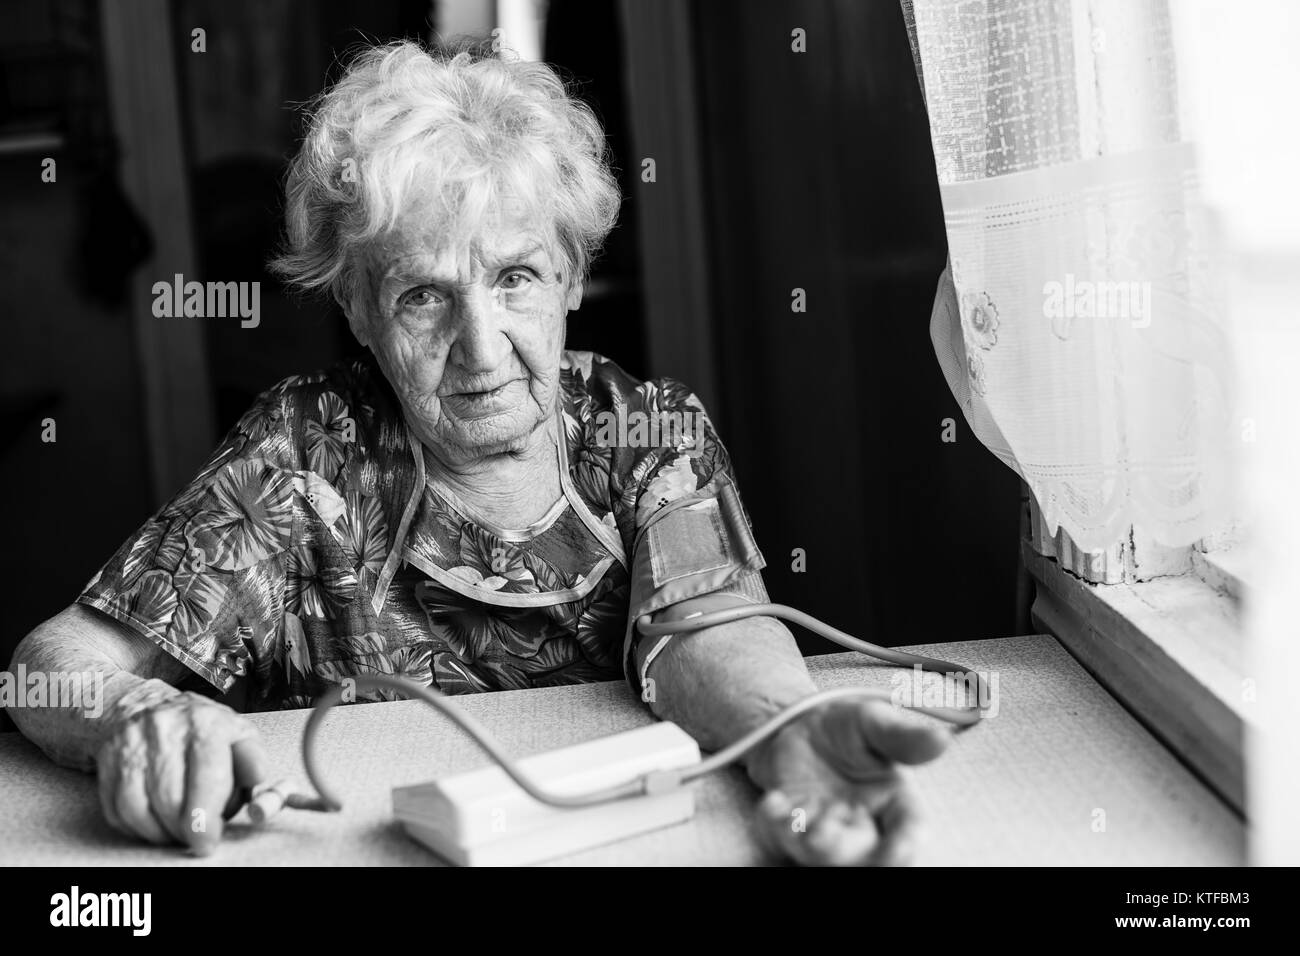 An elderly woman measures arterial pressure. Black-and-white photo. Stock Photo